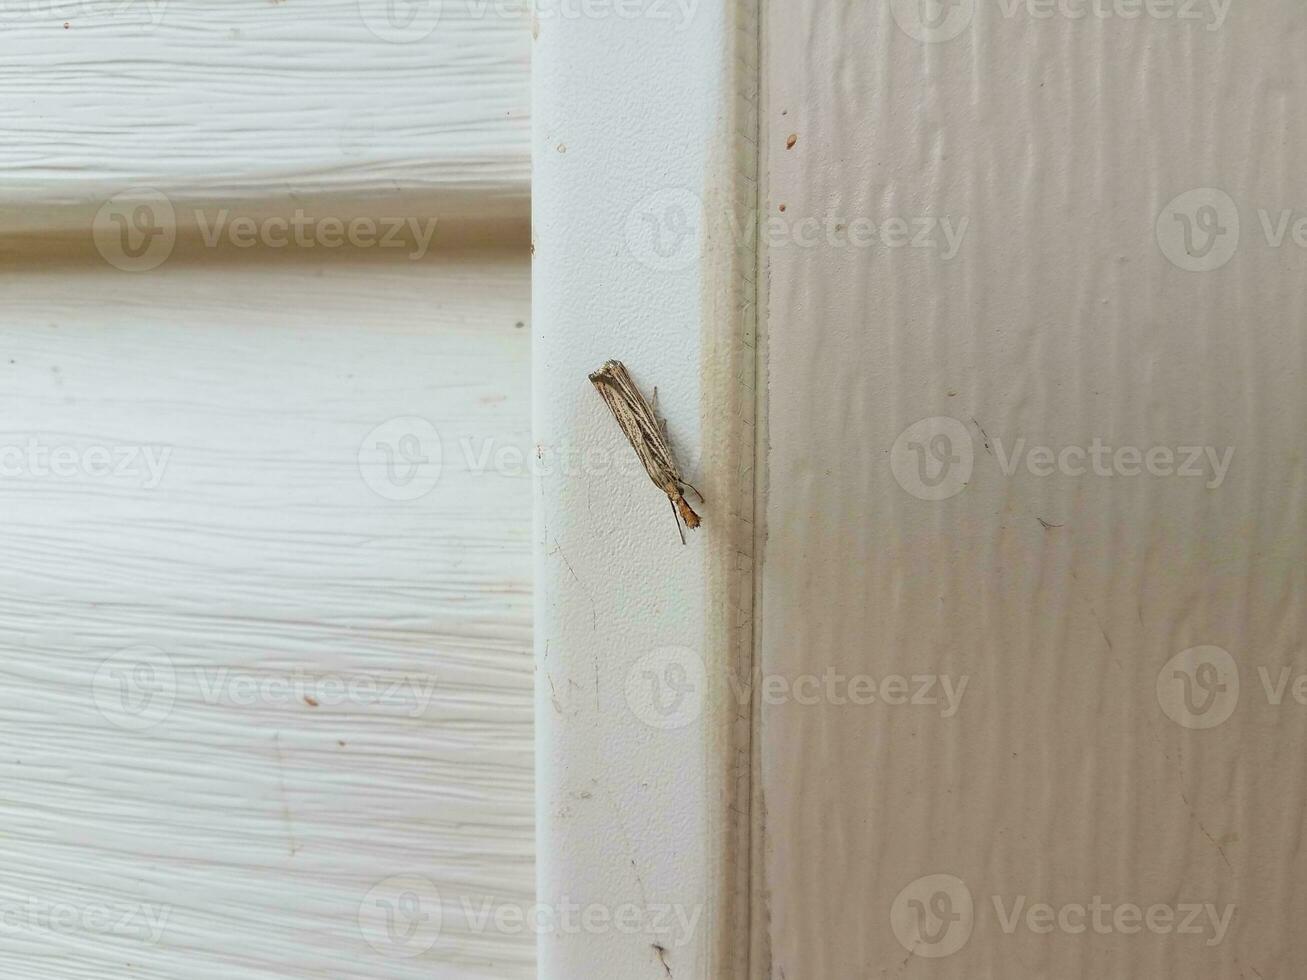 brown moth or insect on white house siding photo